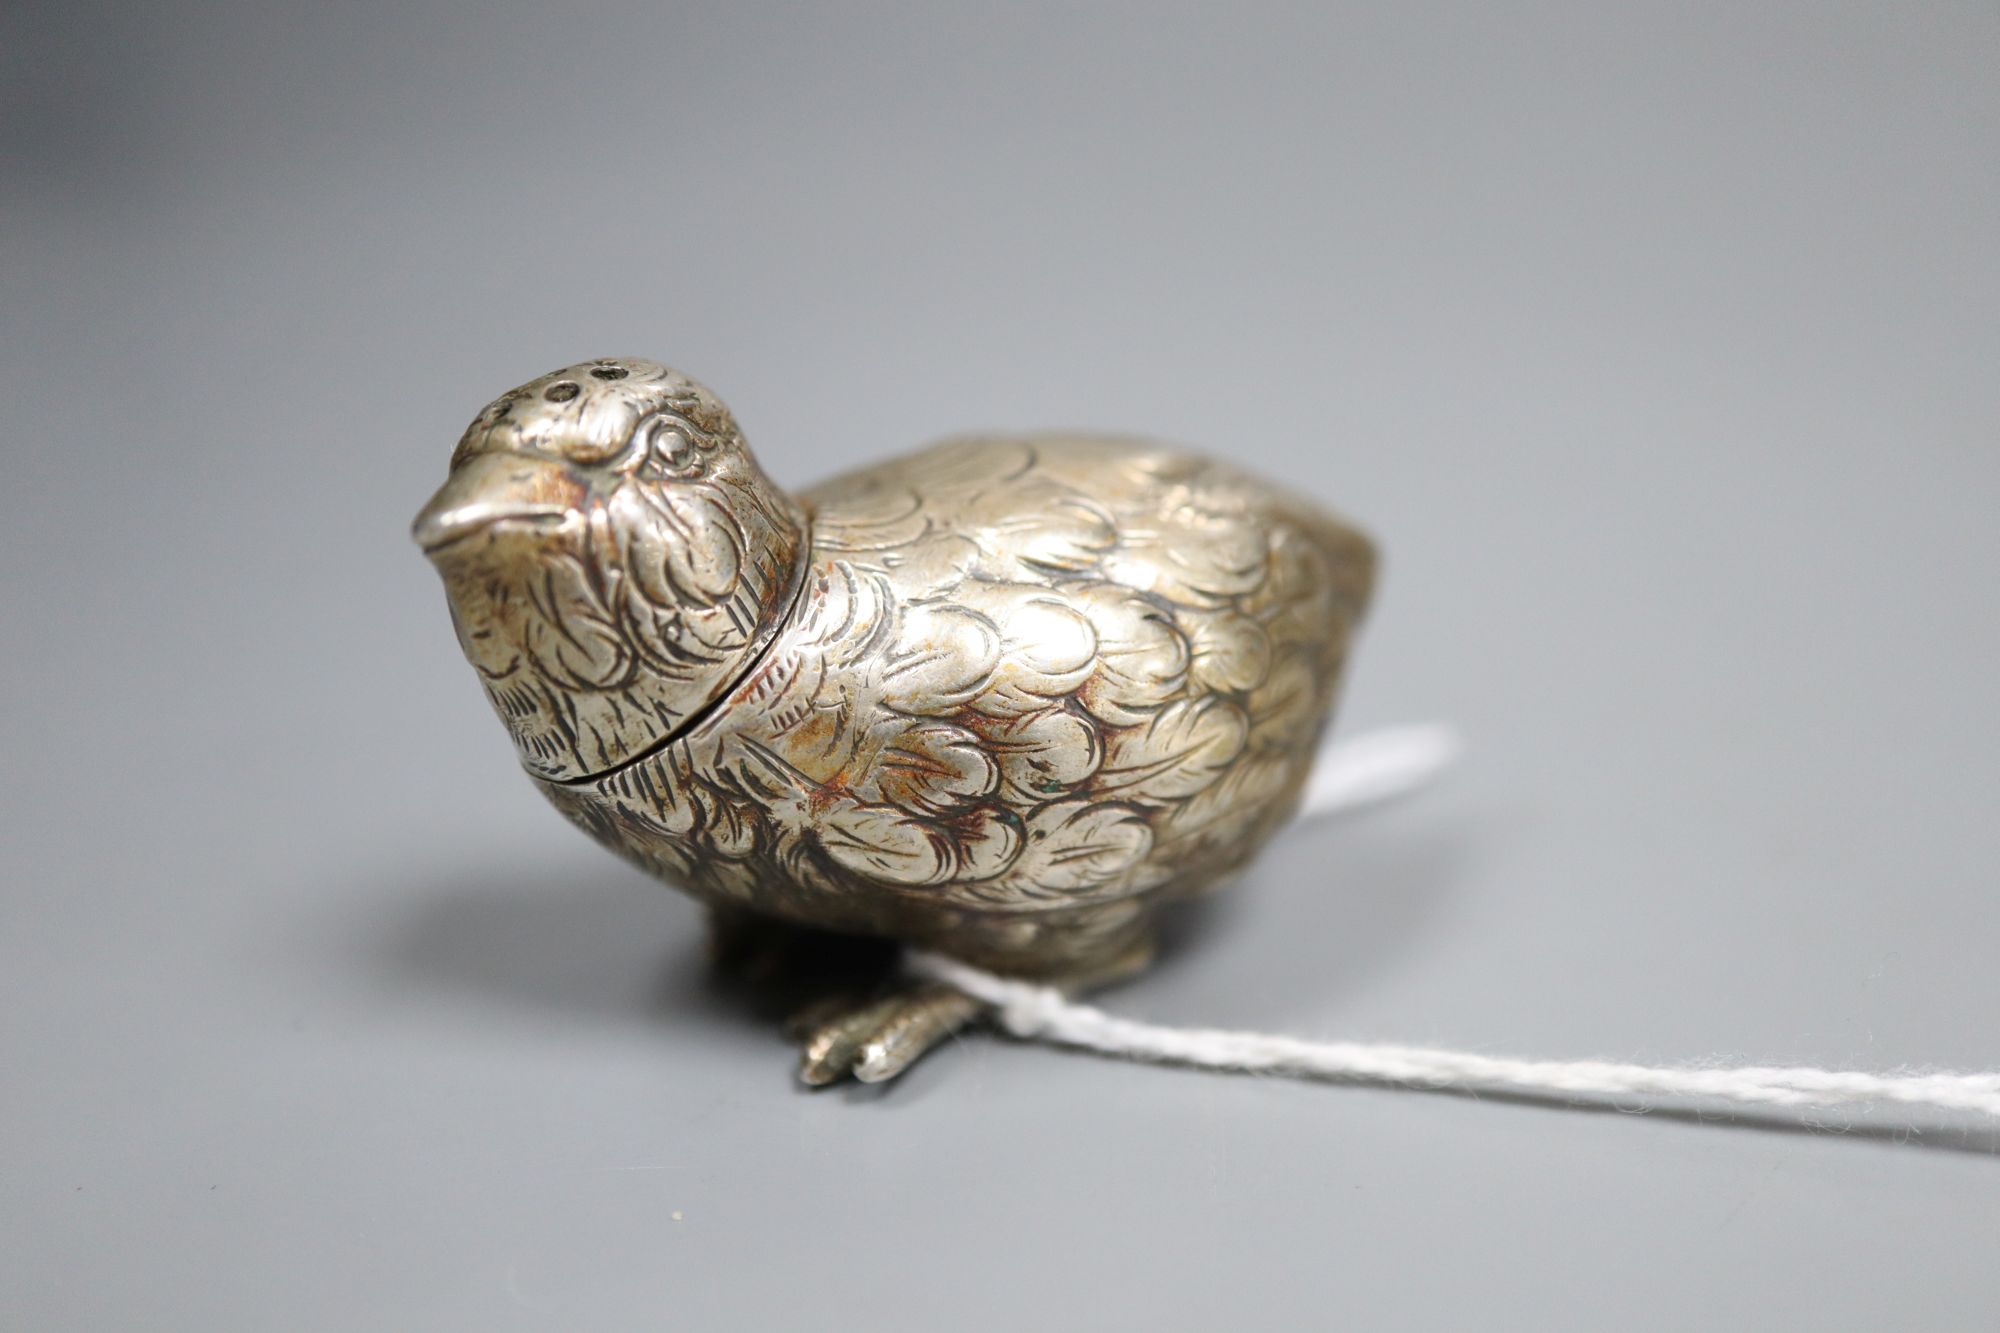 An Edwardian white metal chick pepperette or vinaigrette, with removable head, unmarked, 4.5cm